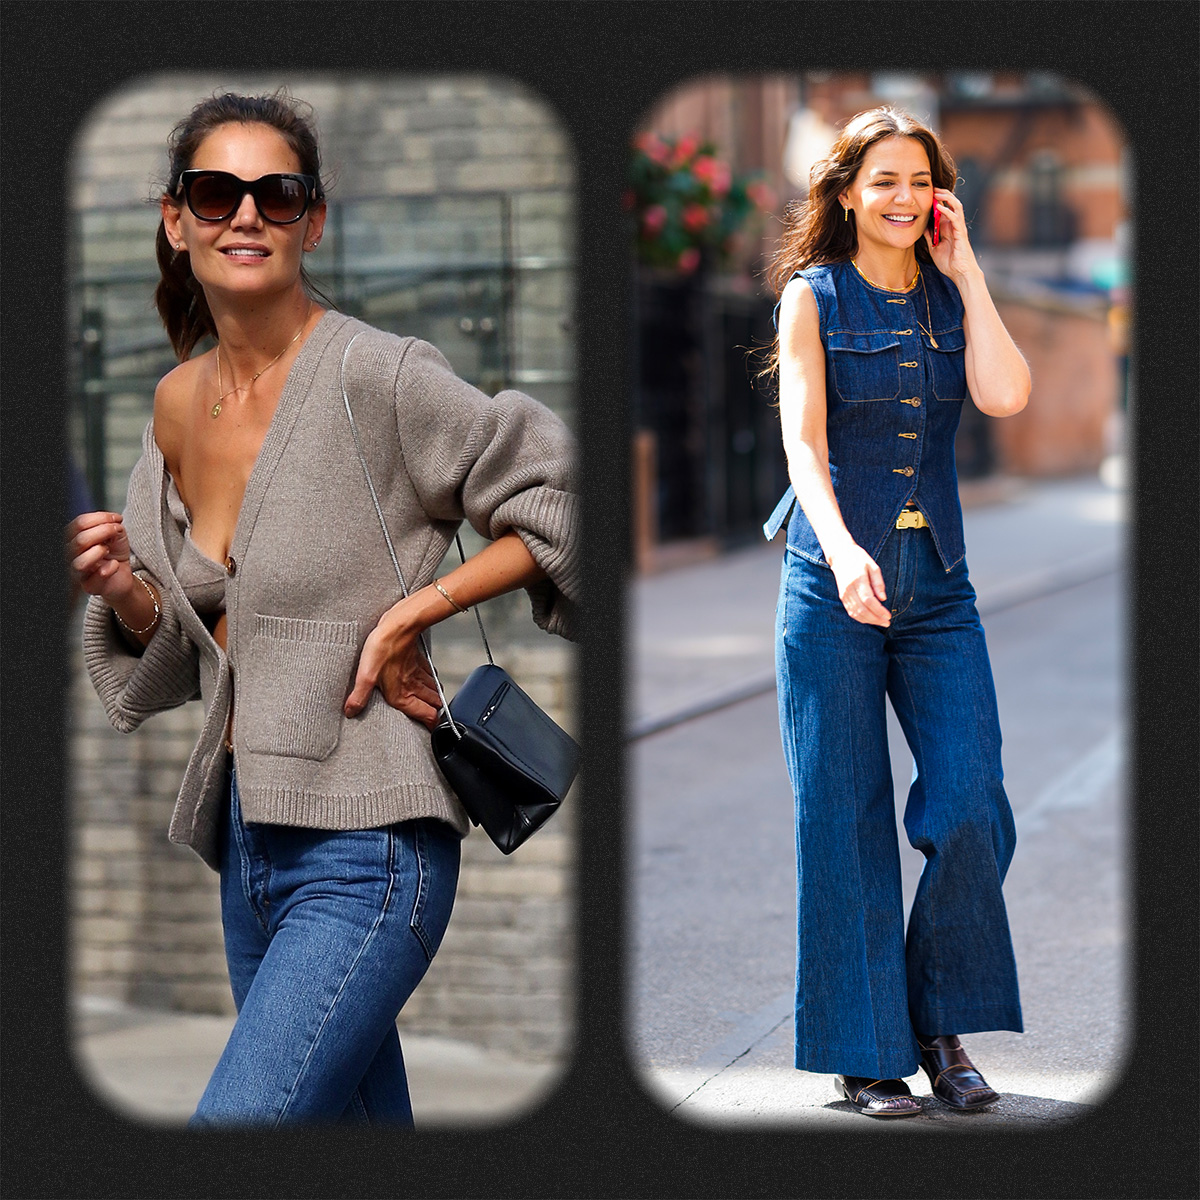 Katie Holmes in a cardigan and jeans and Katie Holmes in denim top and jeans